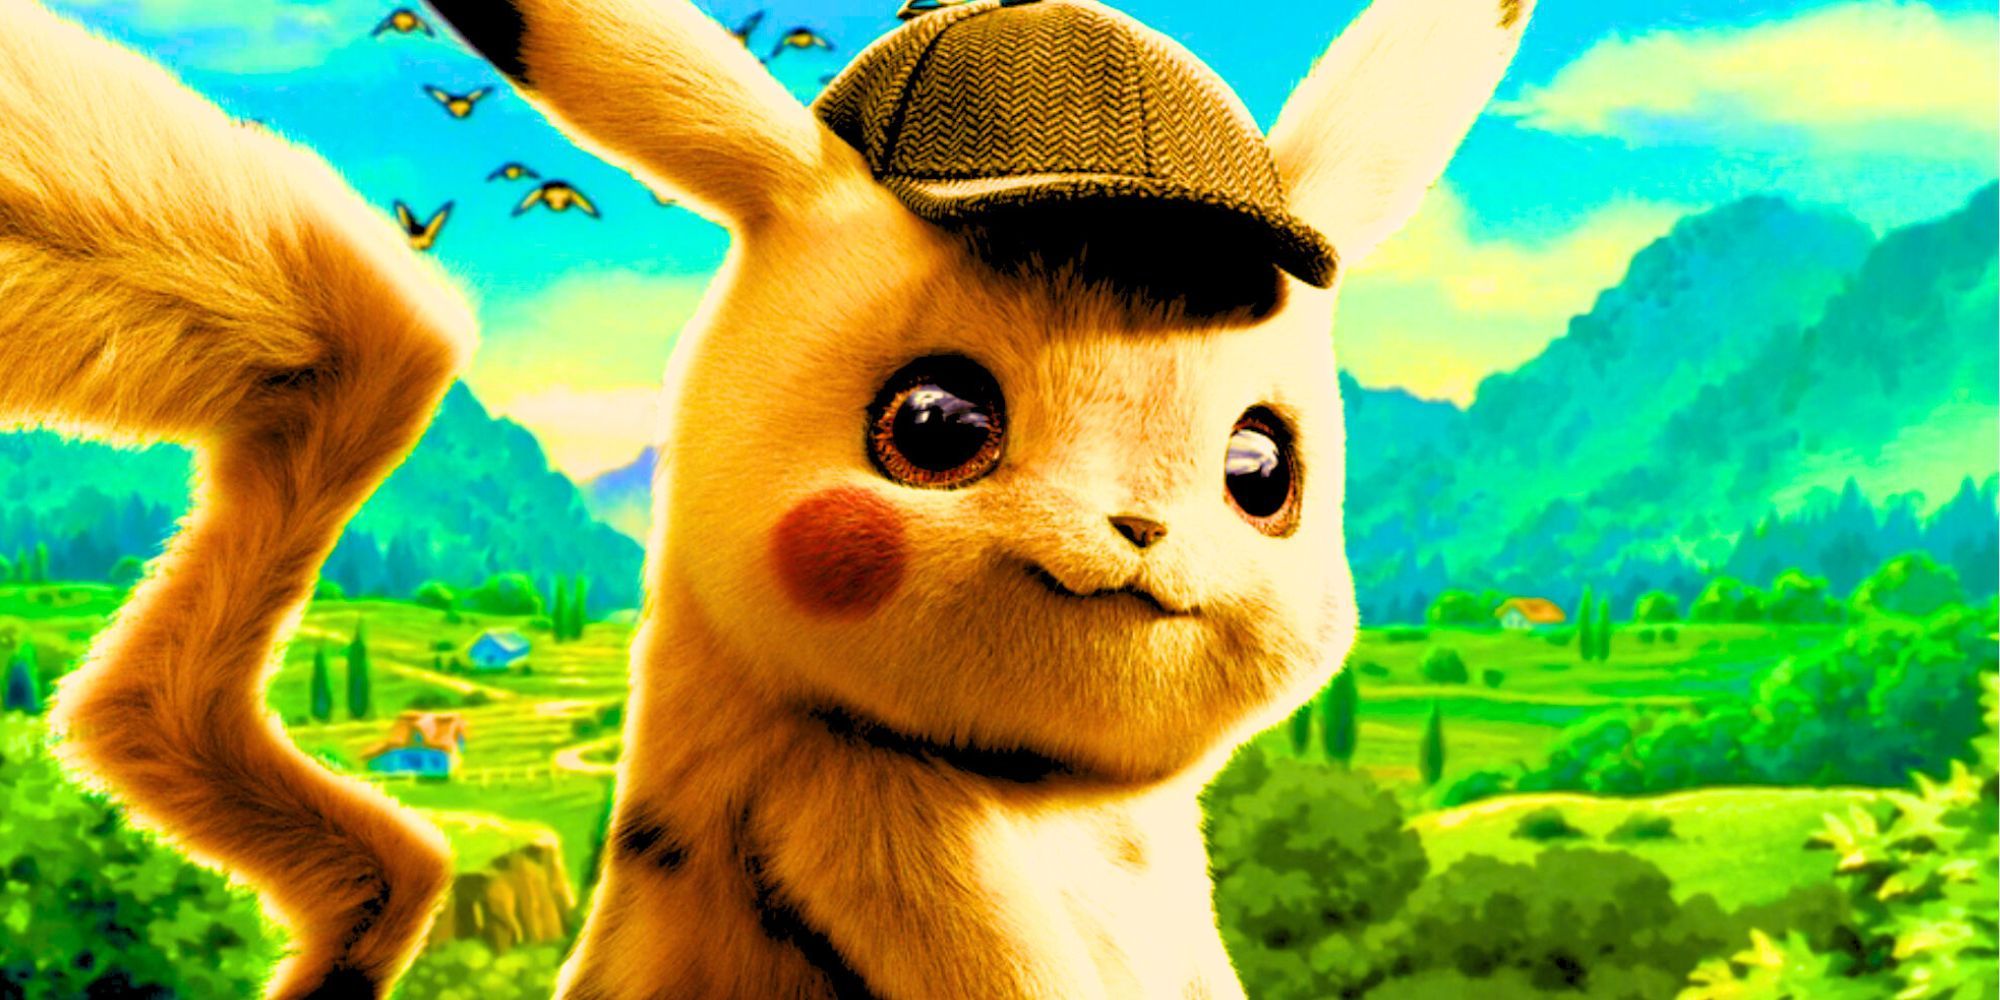 Detective Pikachu smiling at the screen against a landscape from the Pokémon anime